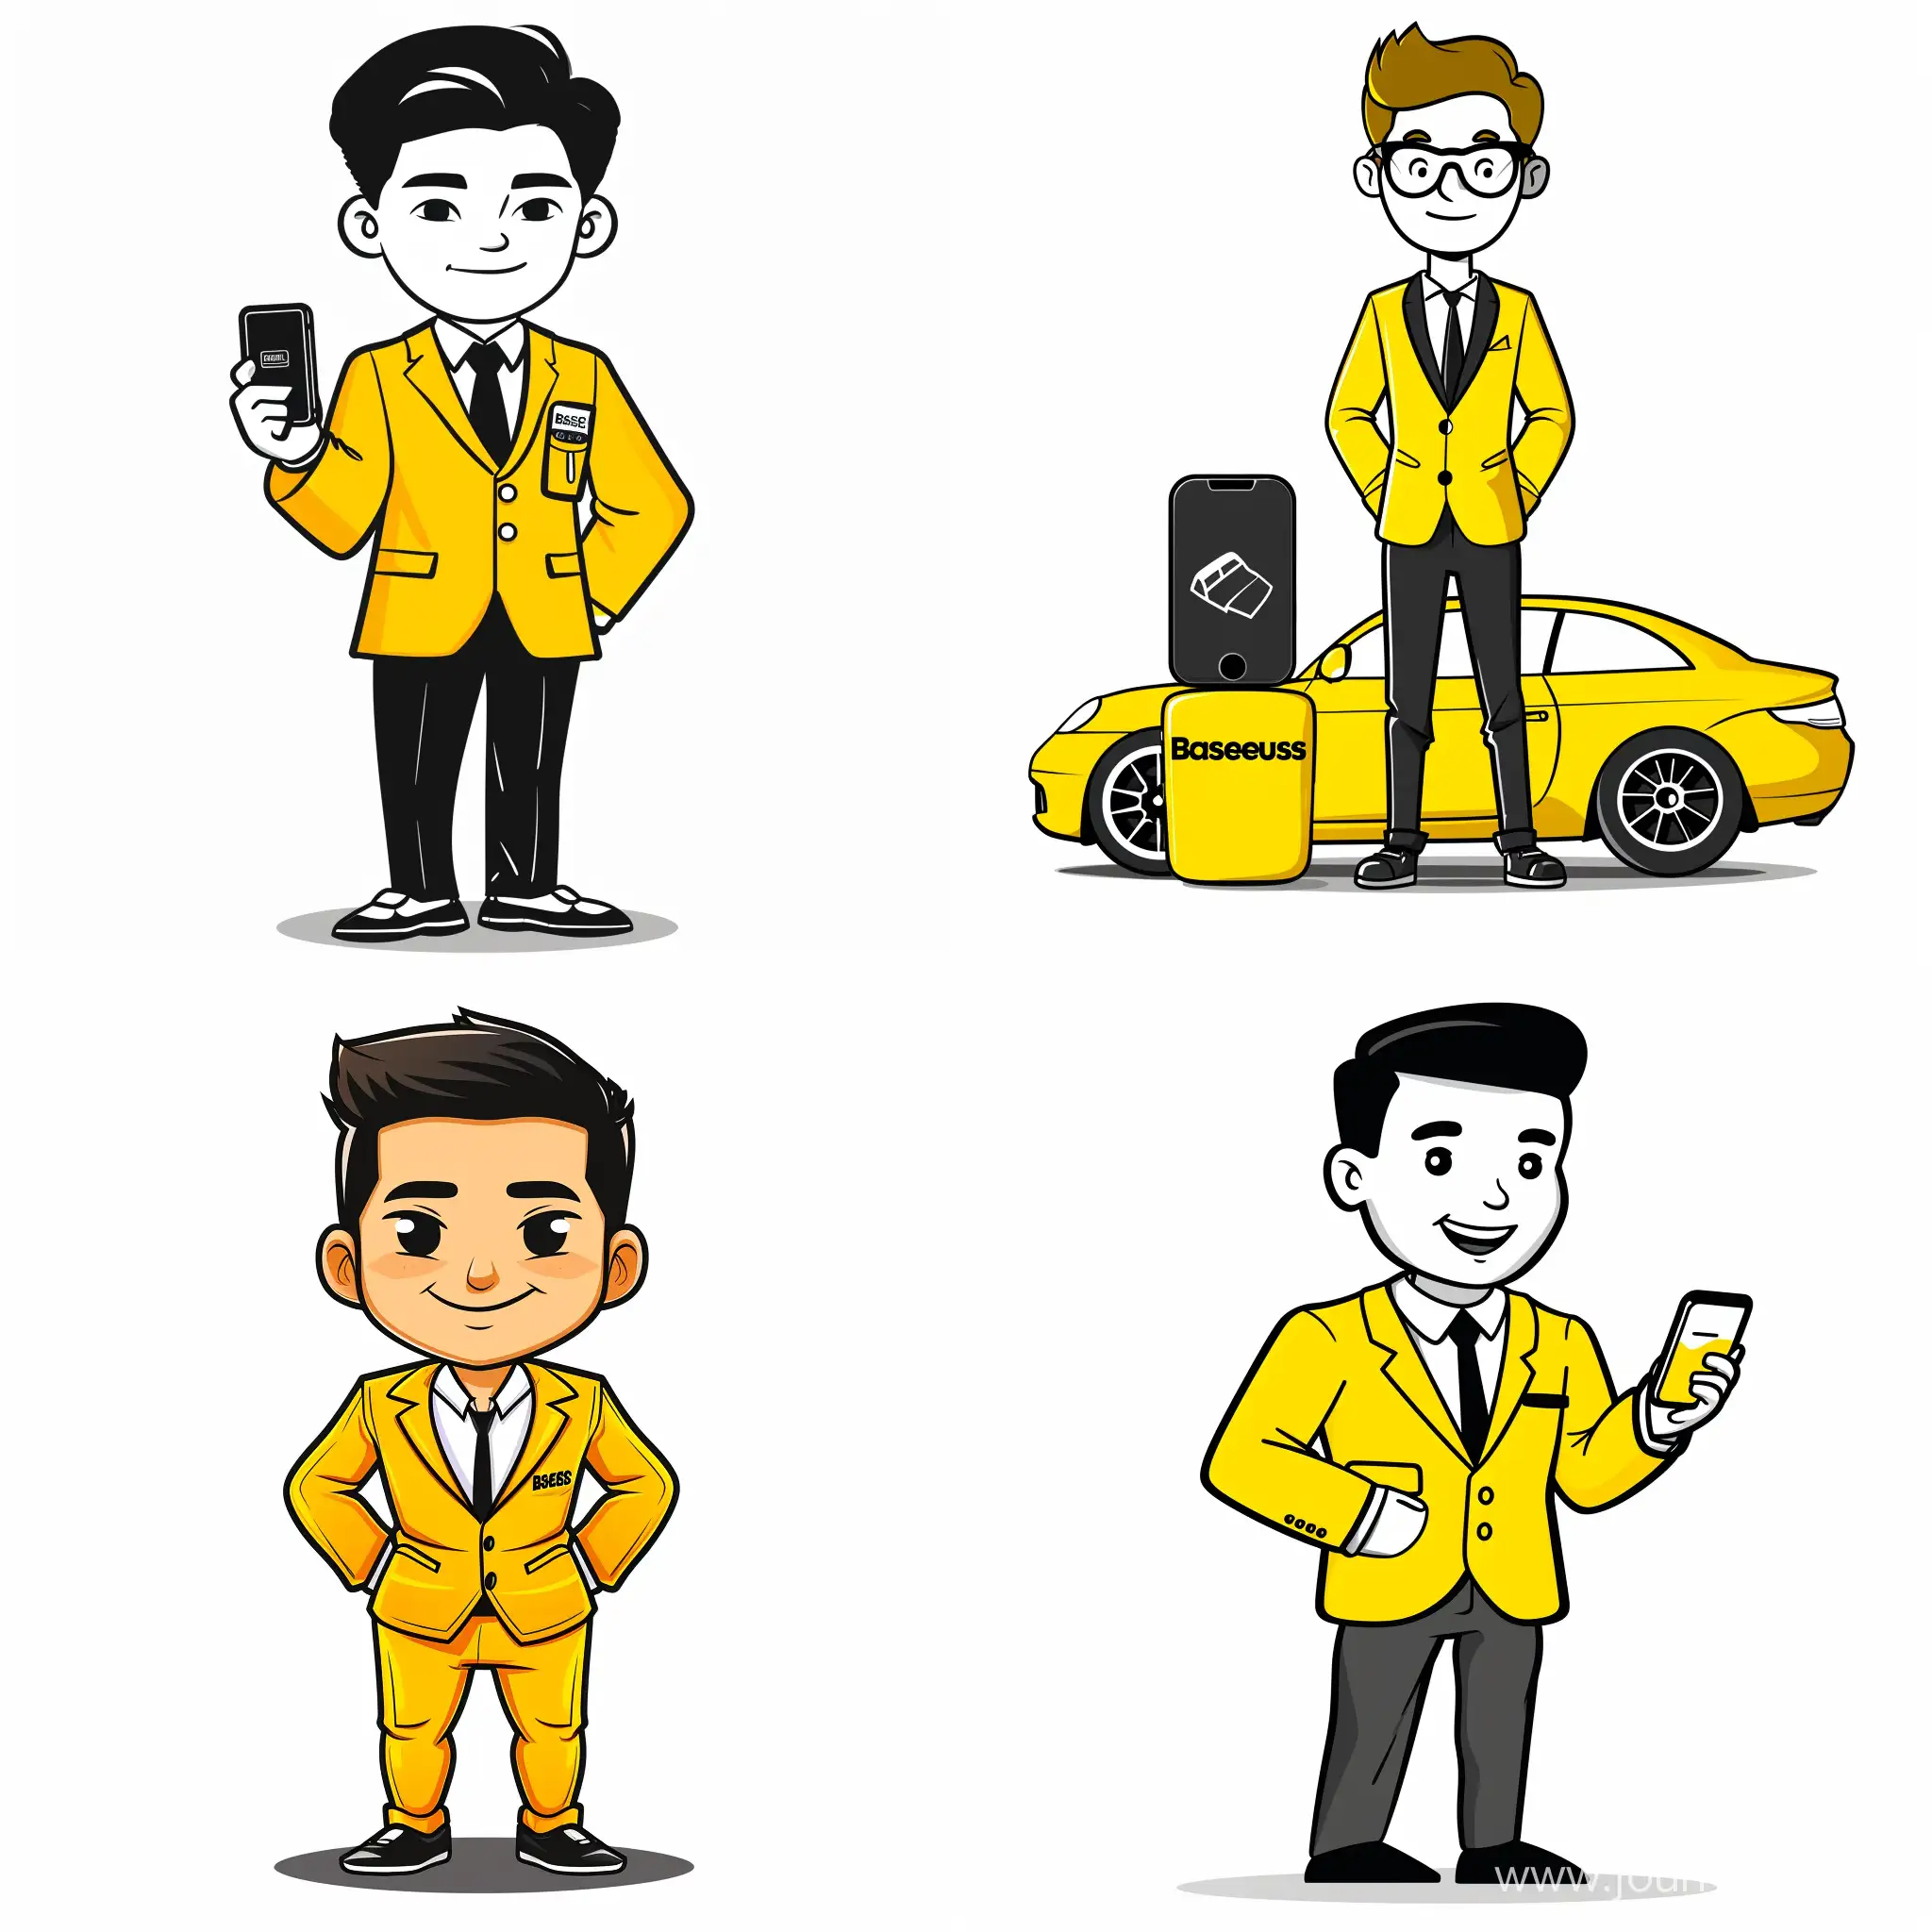 Cartoon character assistant consultant salesperson of the "Baseus" brand - accessories for smartphones, car accessories, computer peripherals
Consultant suit color yellow black and white